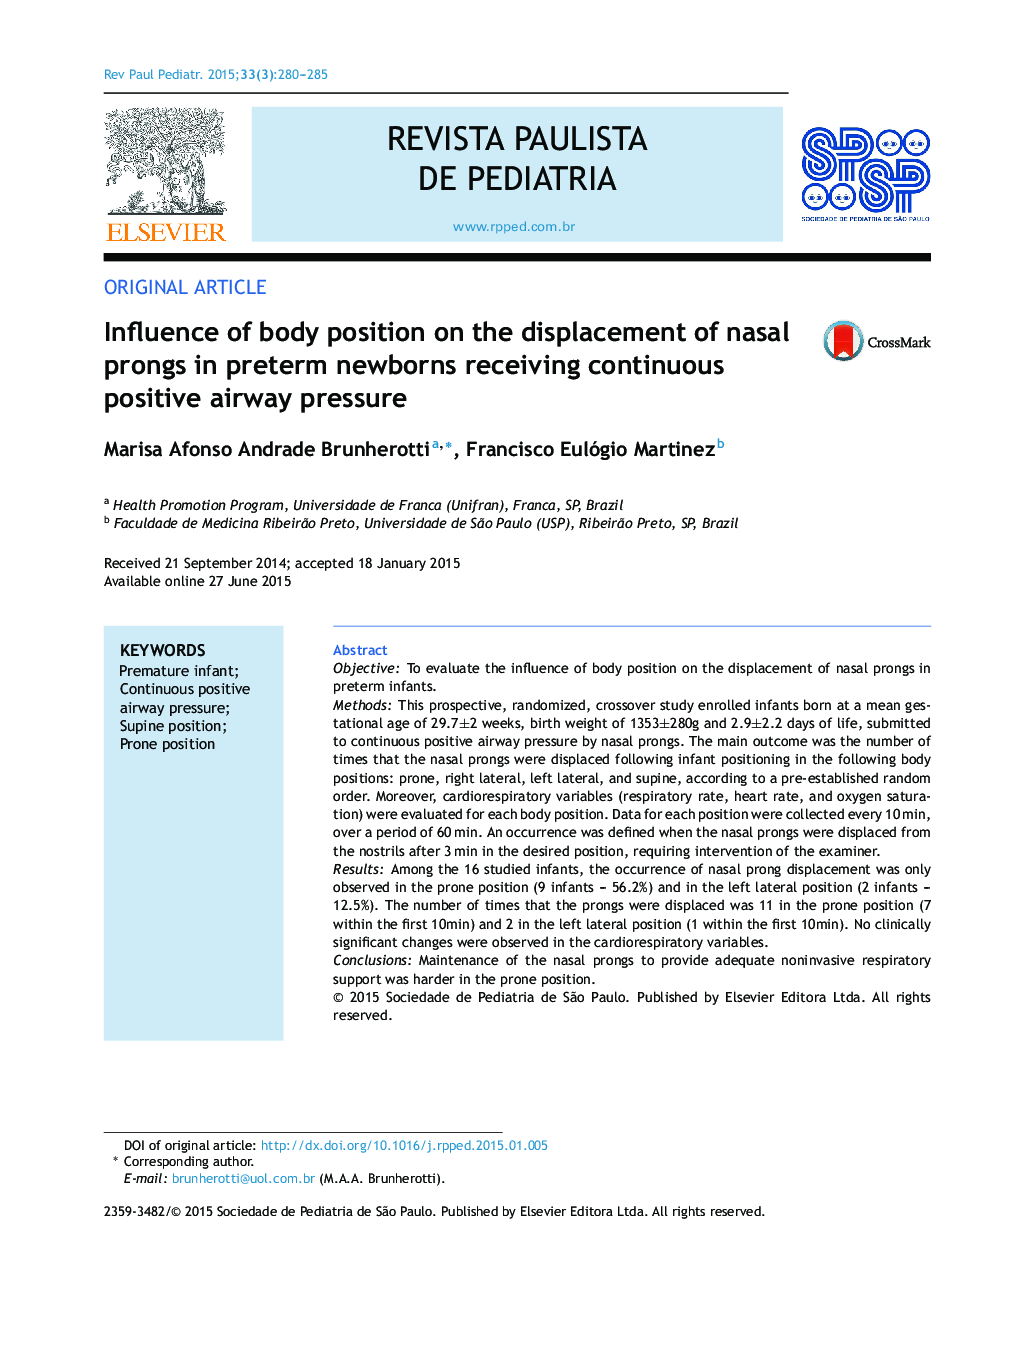 Influence of body position on the displacement of nasal prongs in preterm newborns receiving continuous positive airway pressure